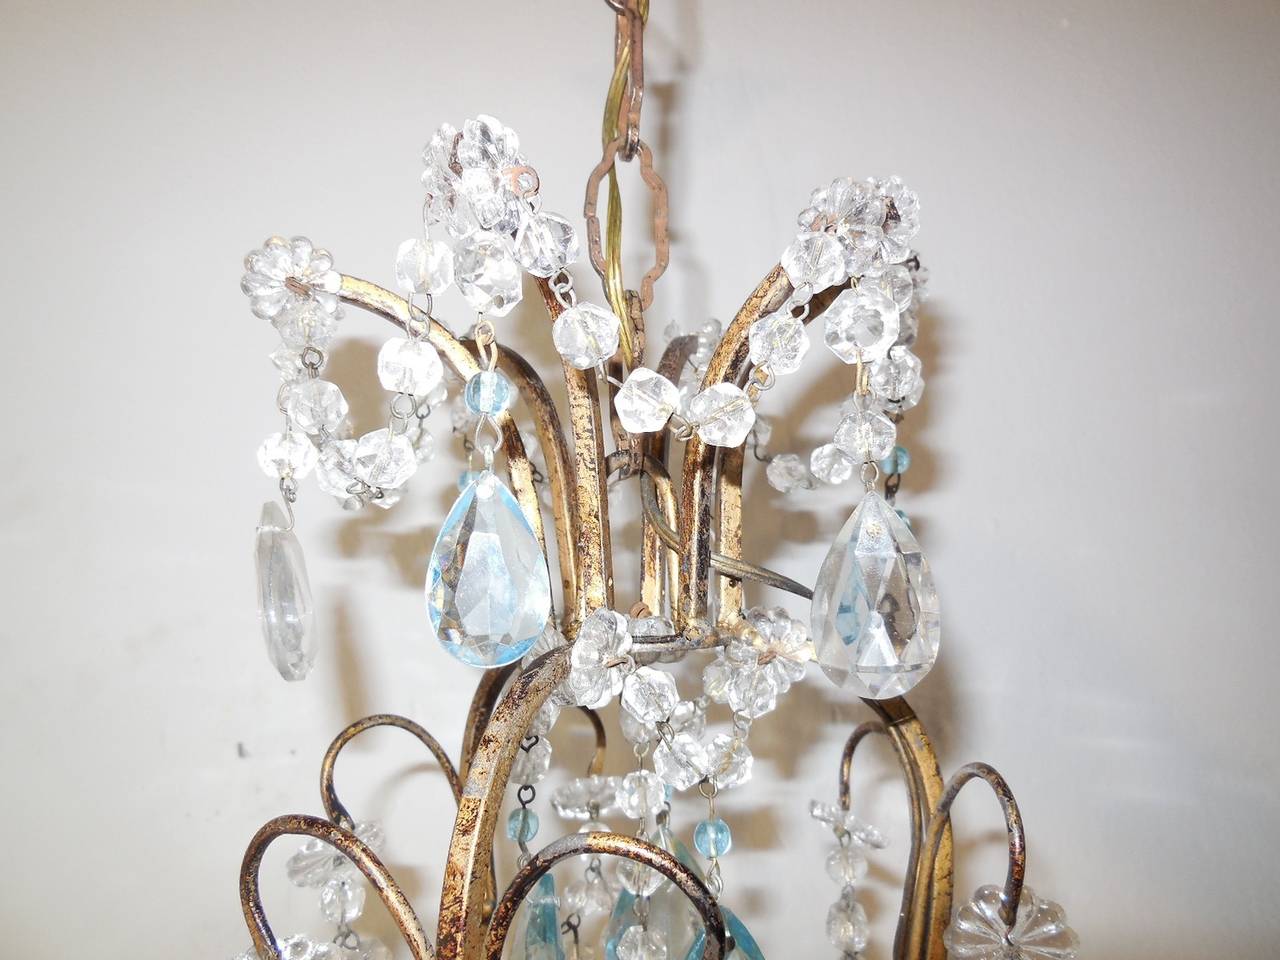 French Aqua Crystal Prisms, Drops and Flowers Chandelier, circa 1920 In Excellent Condition For Sale In Firenze, Toscana